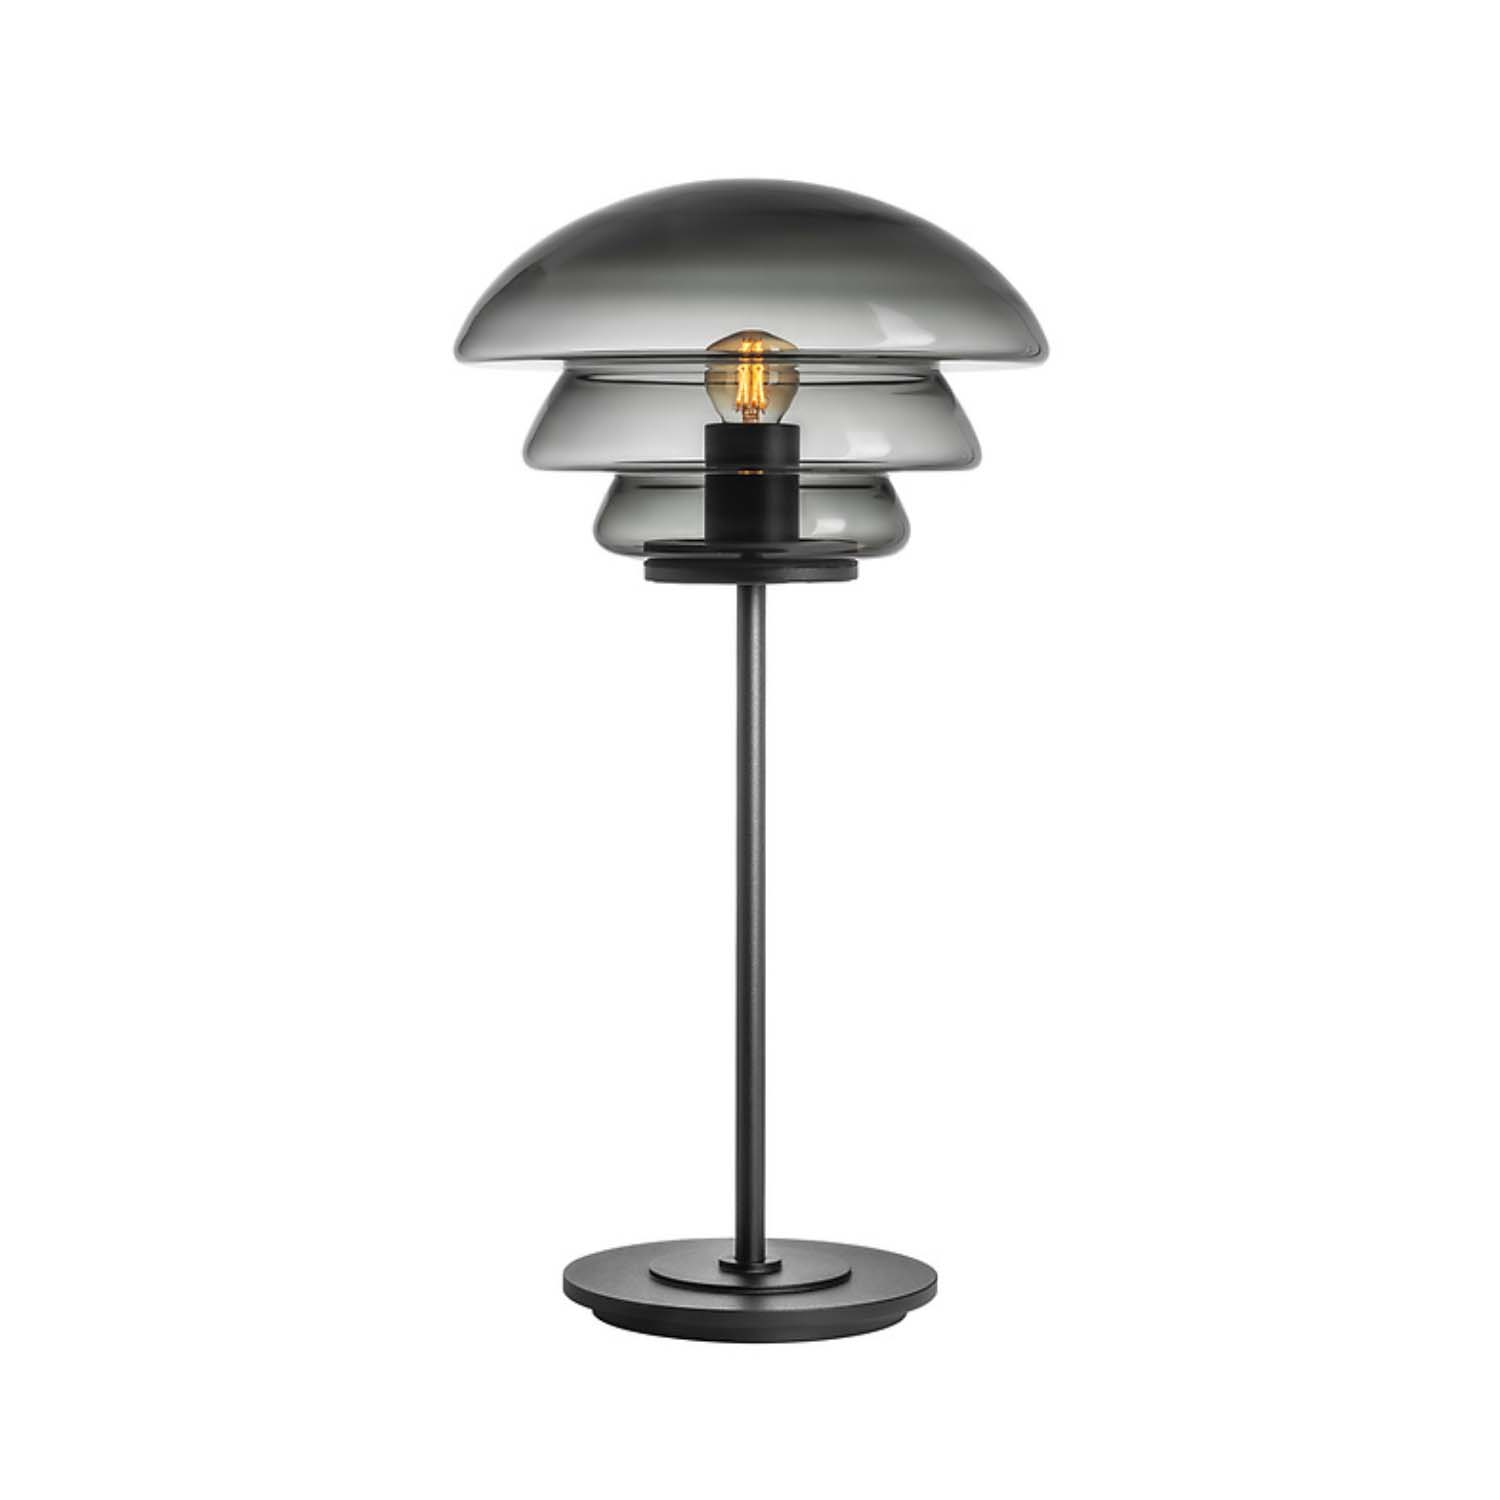 ARCHIVE 4006 - Handmade blown glass table lamp